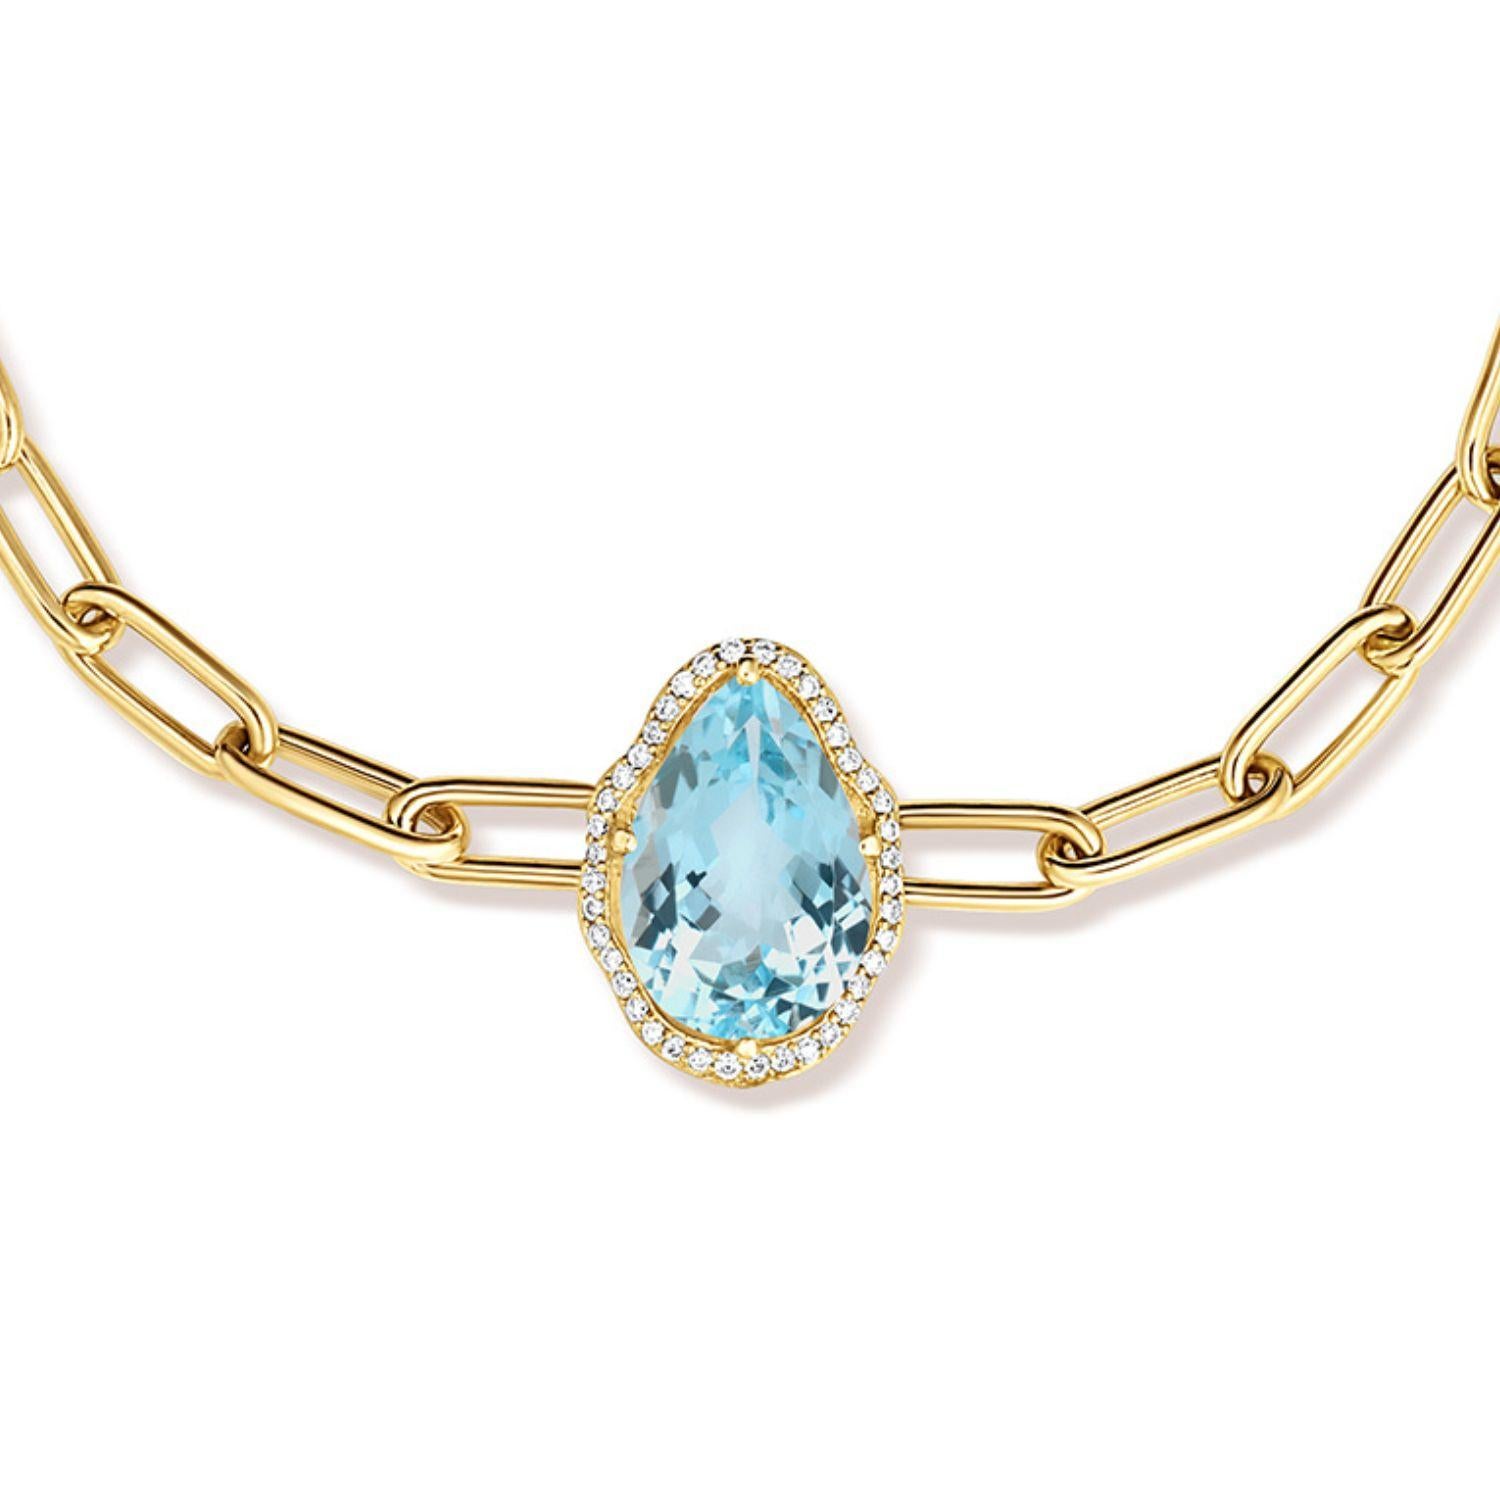 Glow Bracelet. 18K yellow gold (750/1000), with a 2.17 carat pear-cut aquamarine and 0.1 carats of round brilliant-cut diamonds. 18K yellow gold chain with adjustable length of 17 cm.